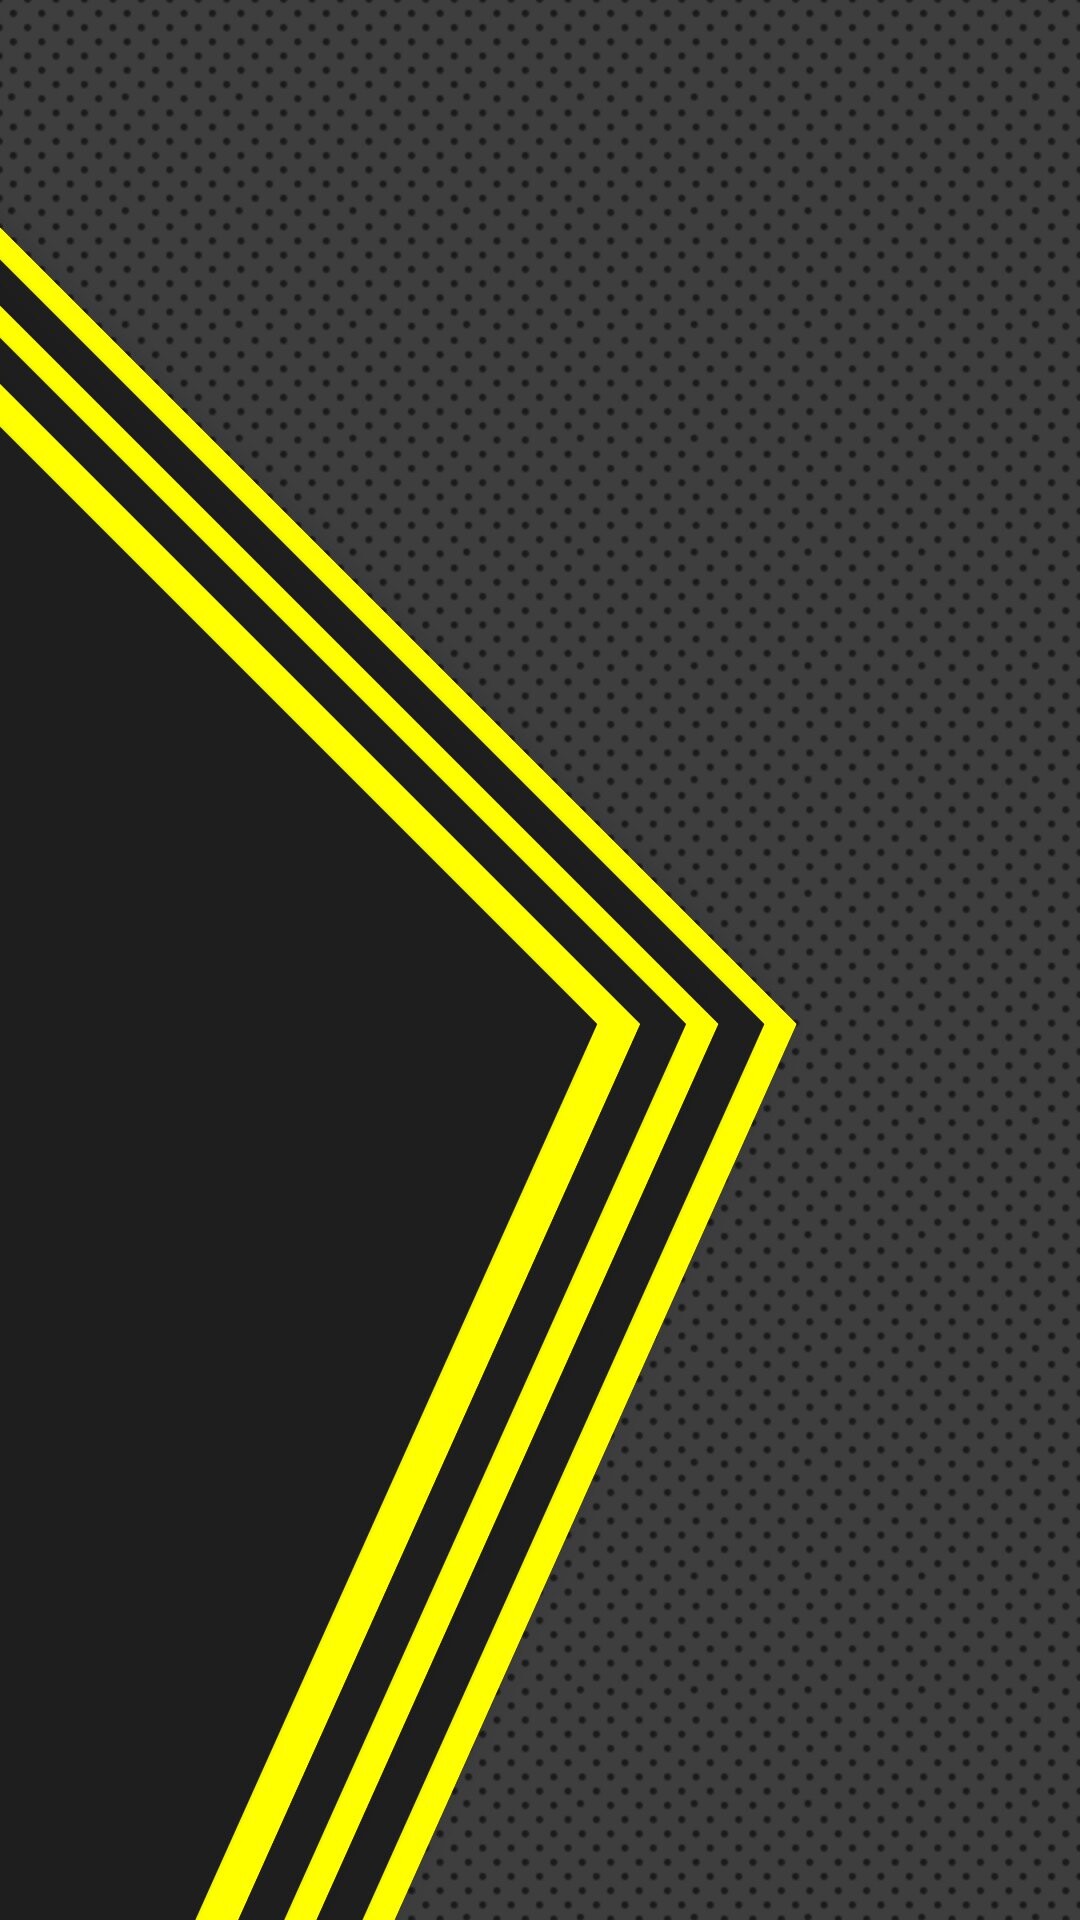 Geometric Abstract: Black, Yellow, Gray, Reflex angles, Parallel lines. 1080x1920 Full HD Wallpaper.